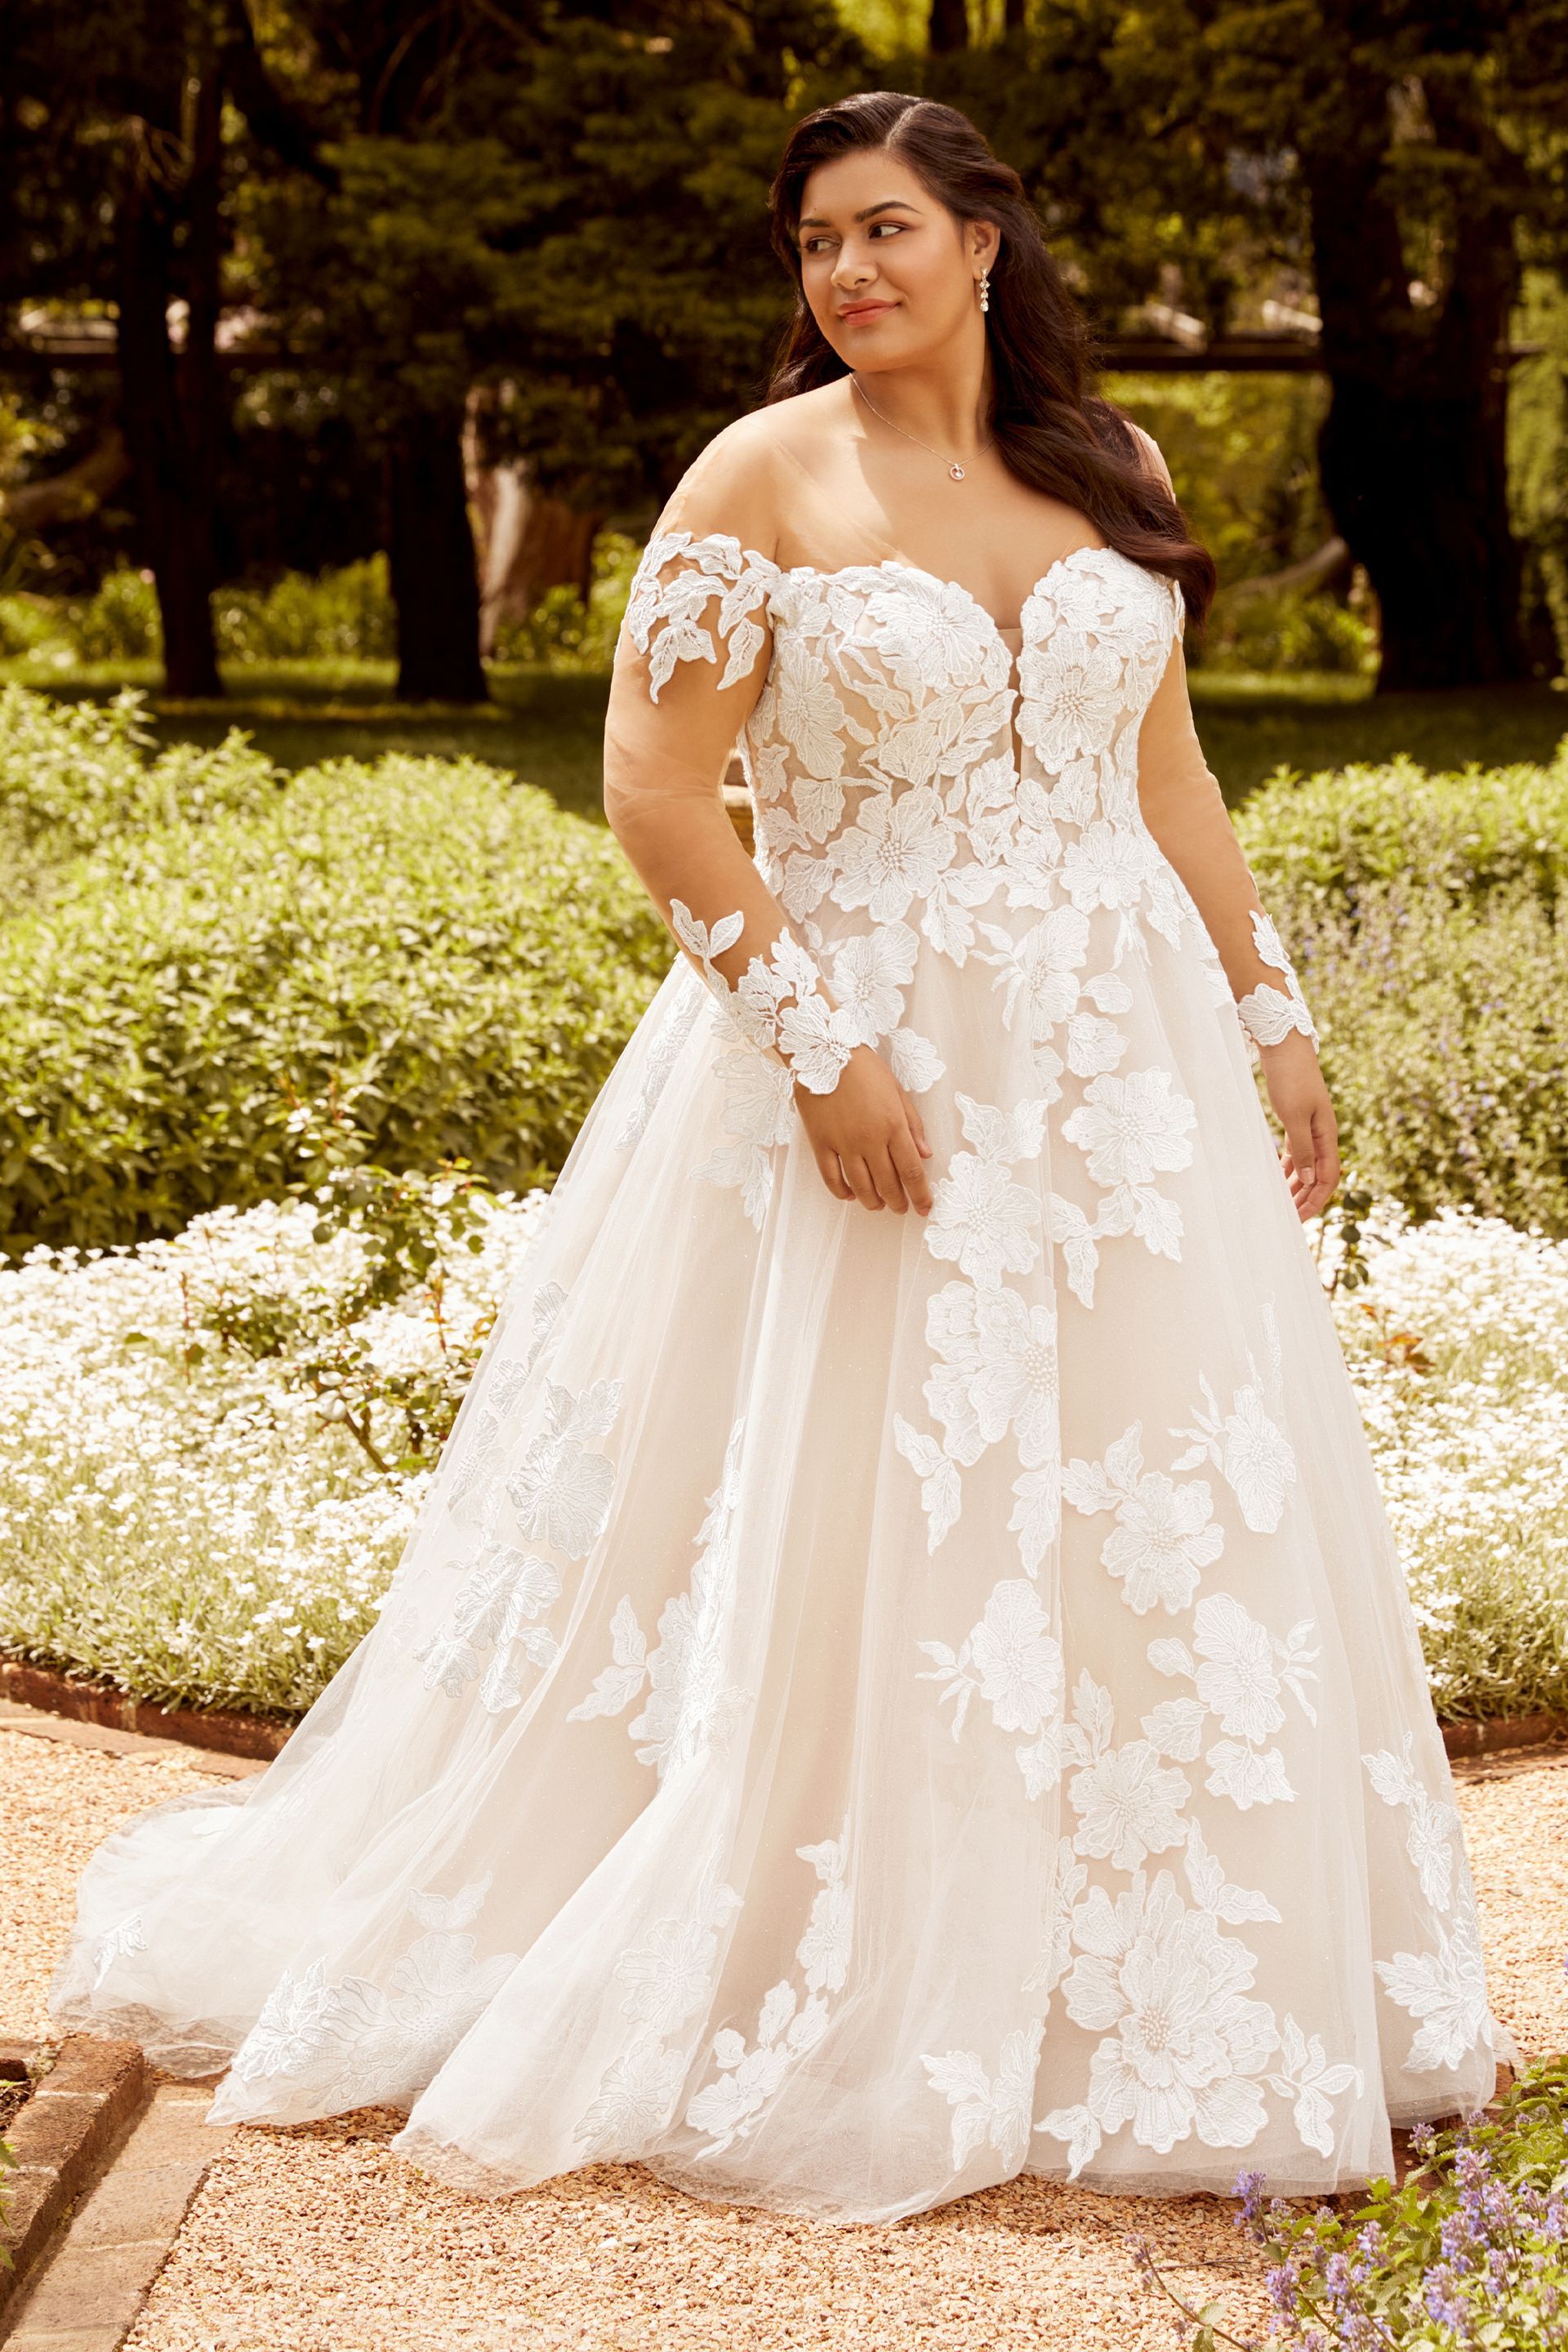 A plus size bride in a white wedding dress is standing in a garden.